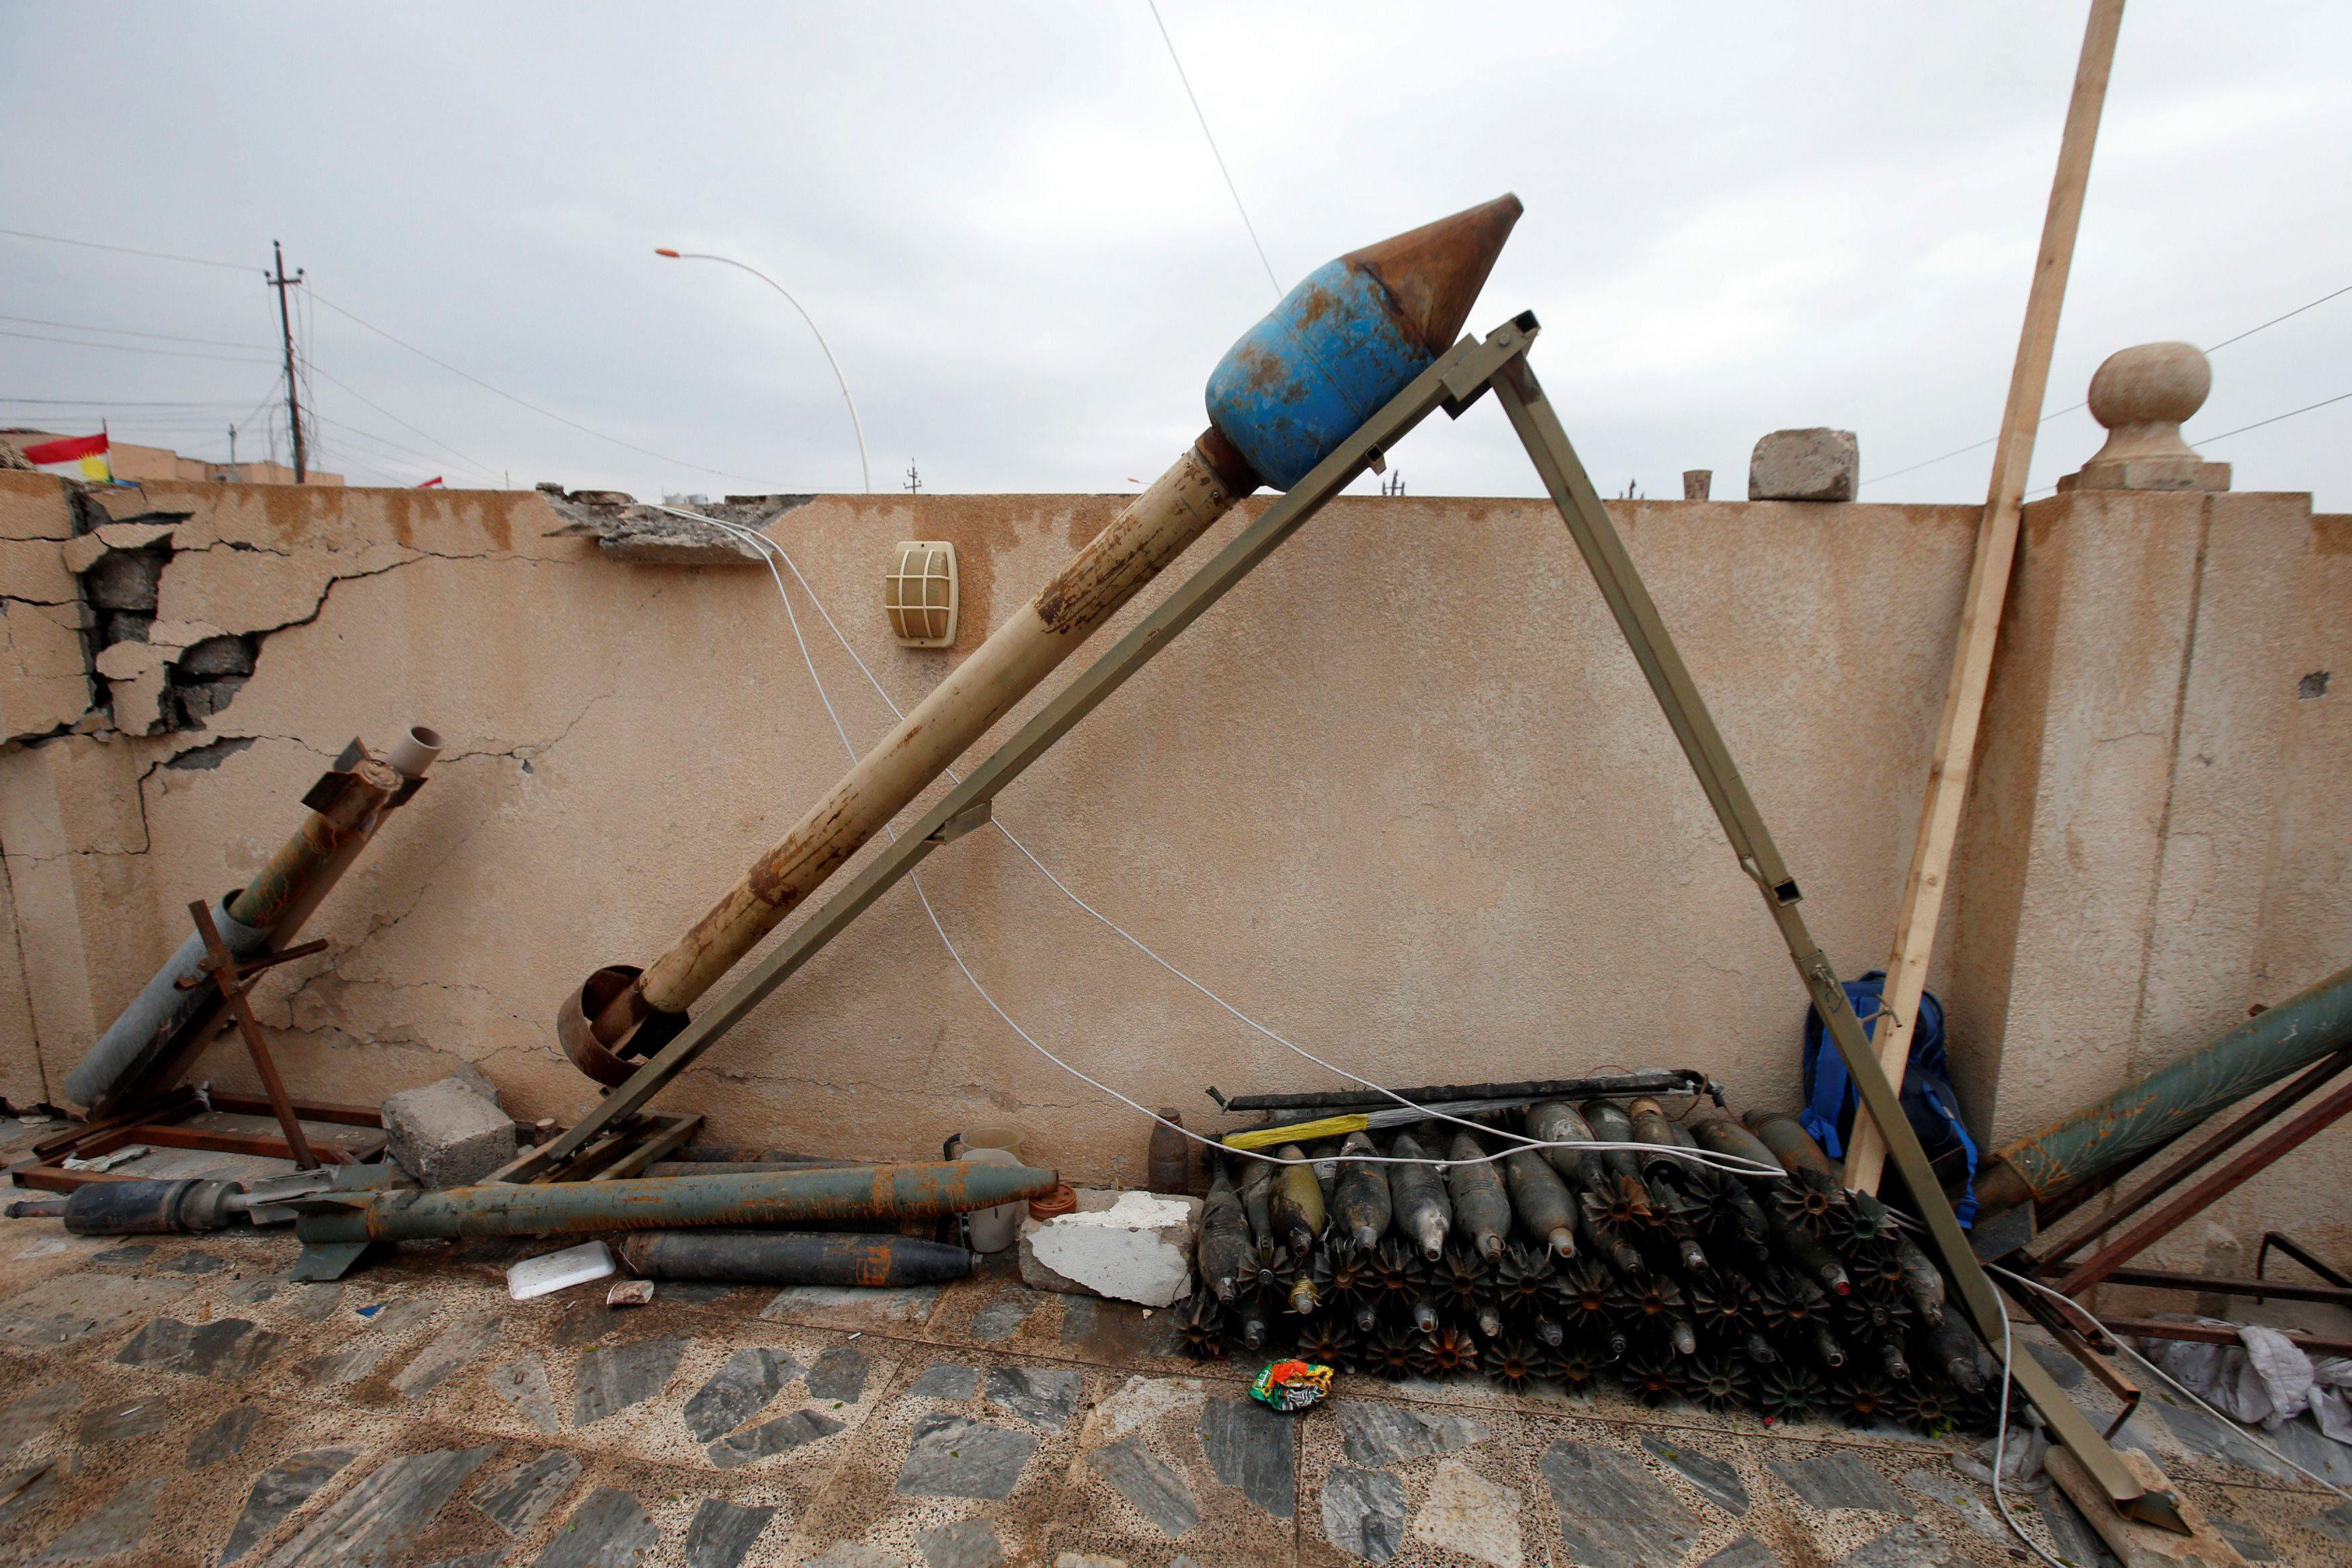 Weapons and ammunition belonging to Islamic State militants are seen in the town of Bashiqa, east of